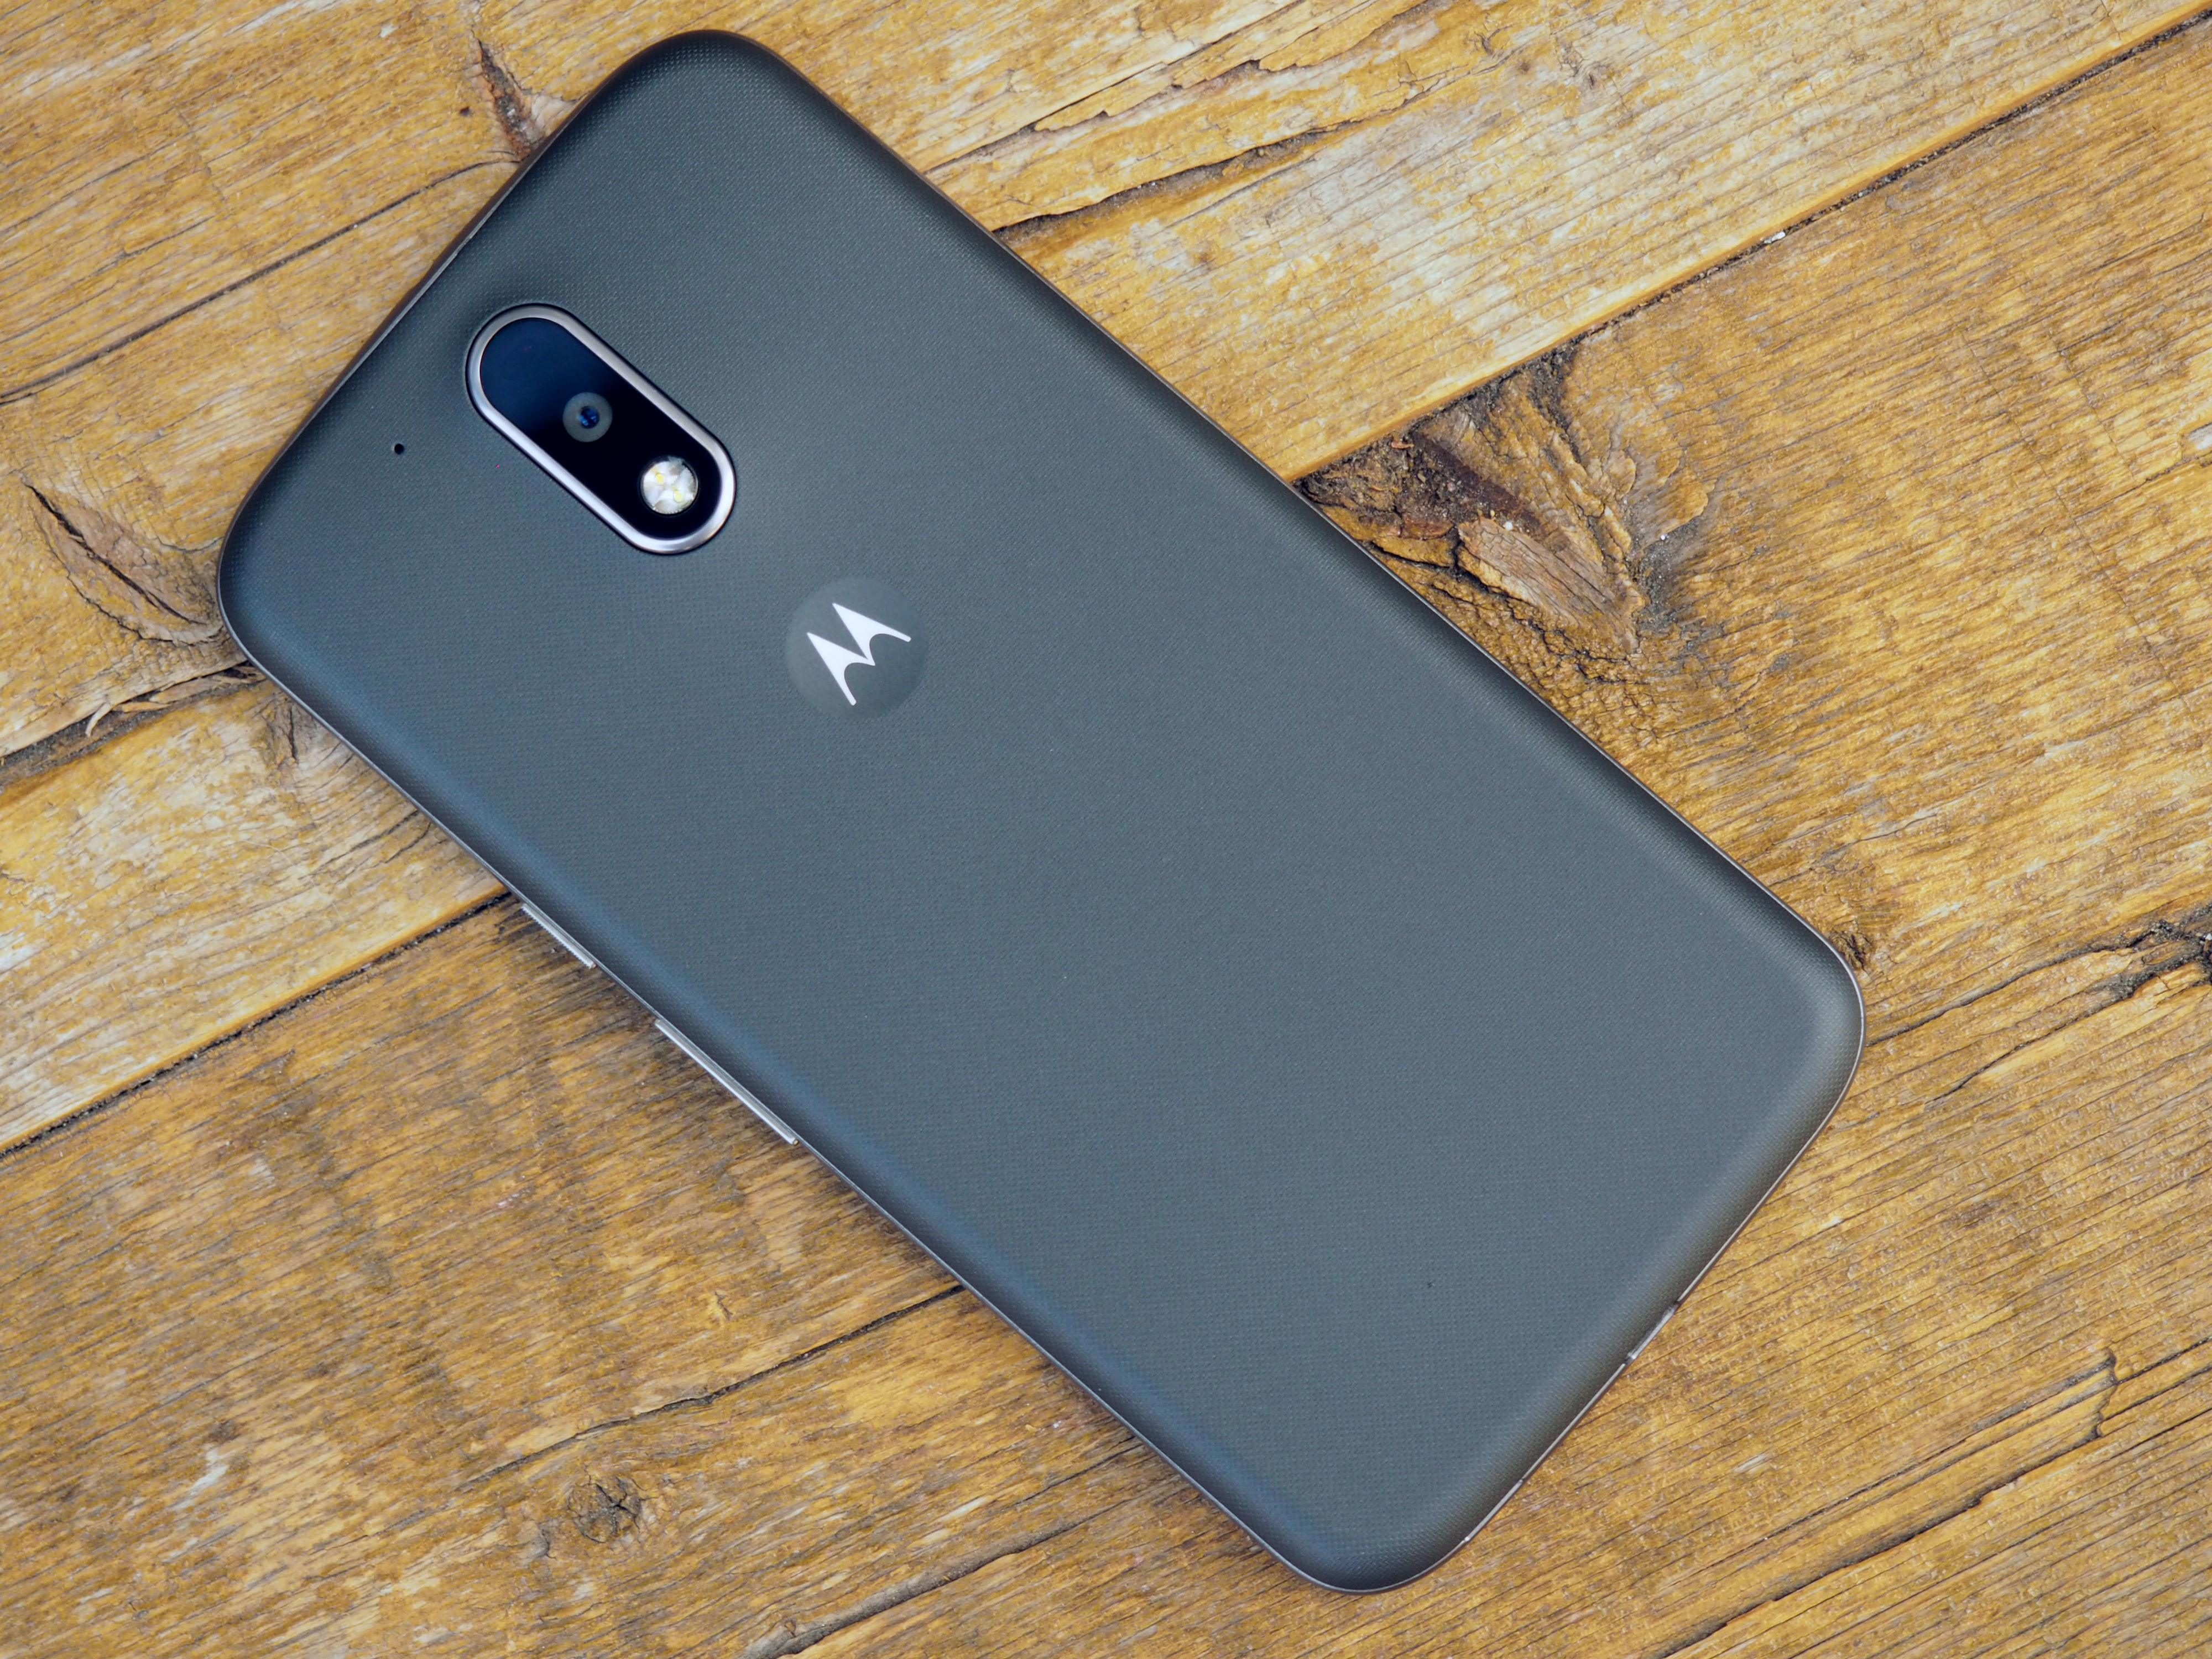 Moto G4 (and Plus): Major Problems and How to Fix Them